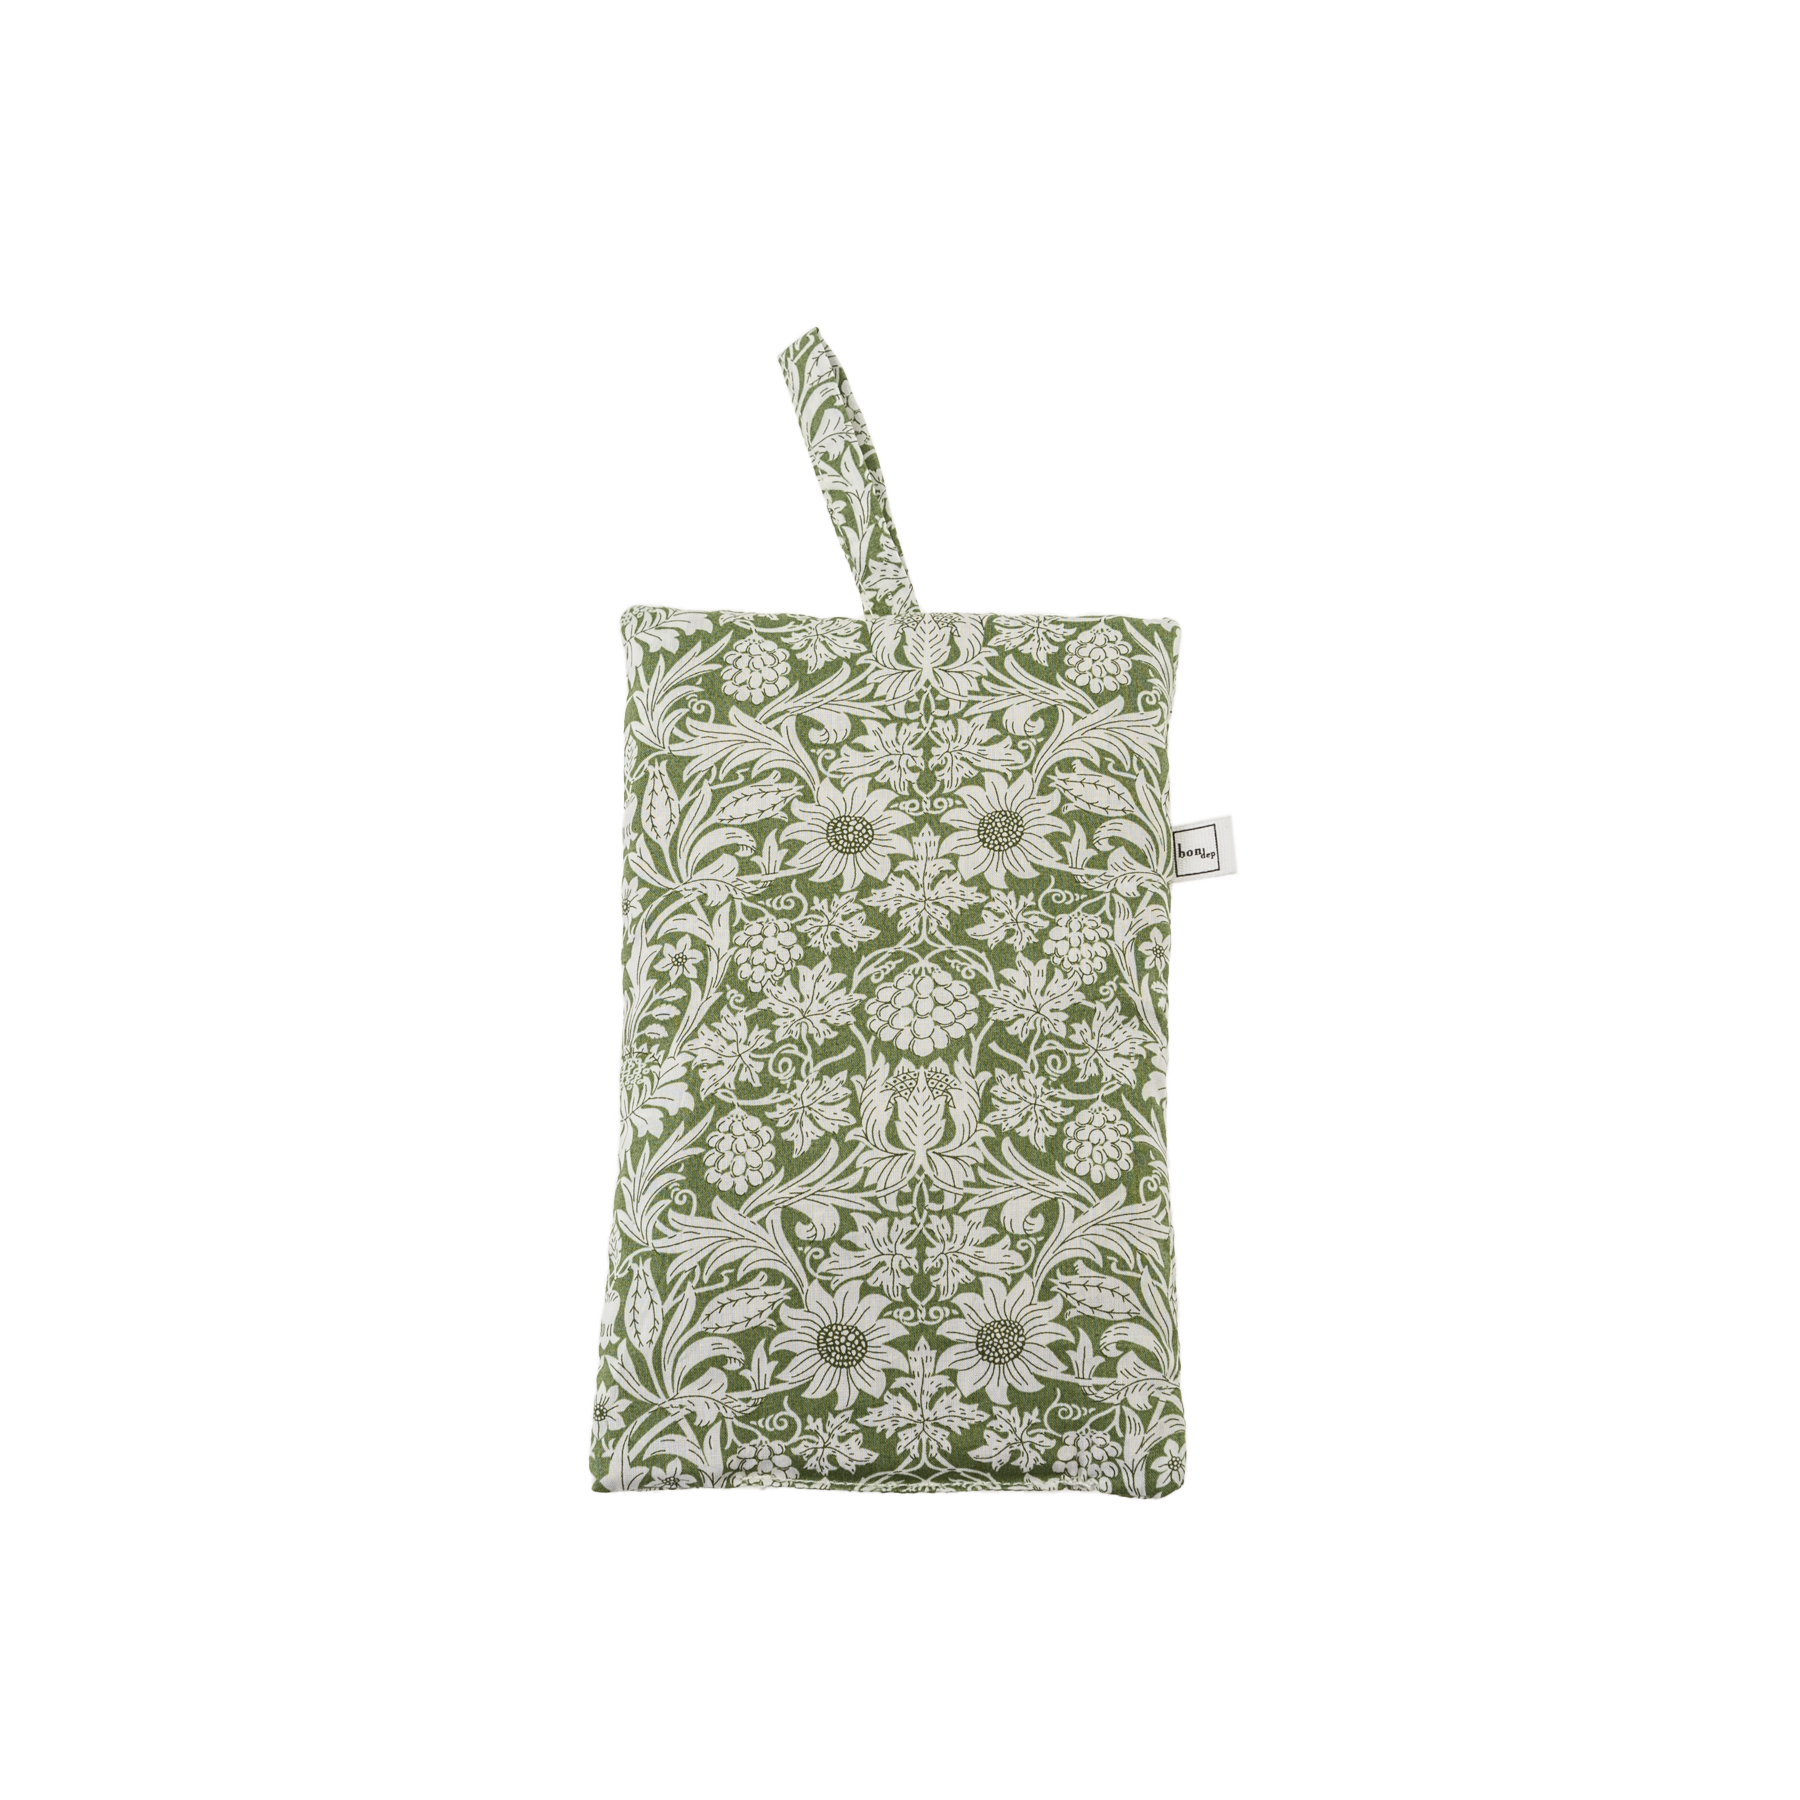 Image of Lavender bags mw Liberty Mortimer Green from Bon Dep Essentials